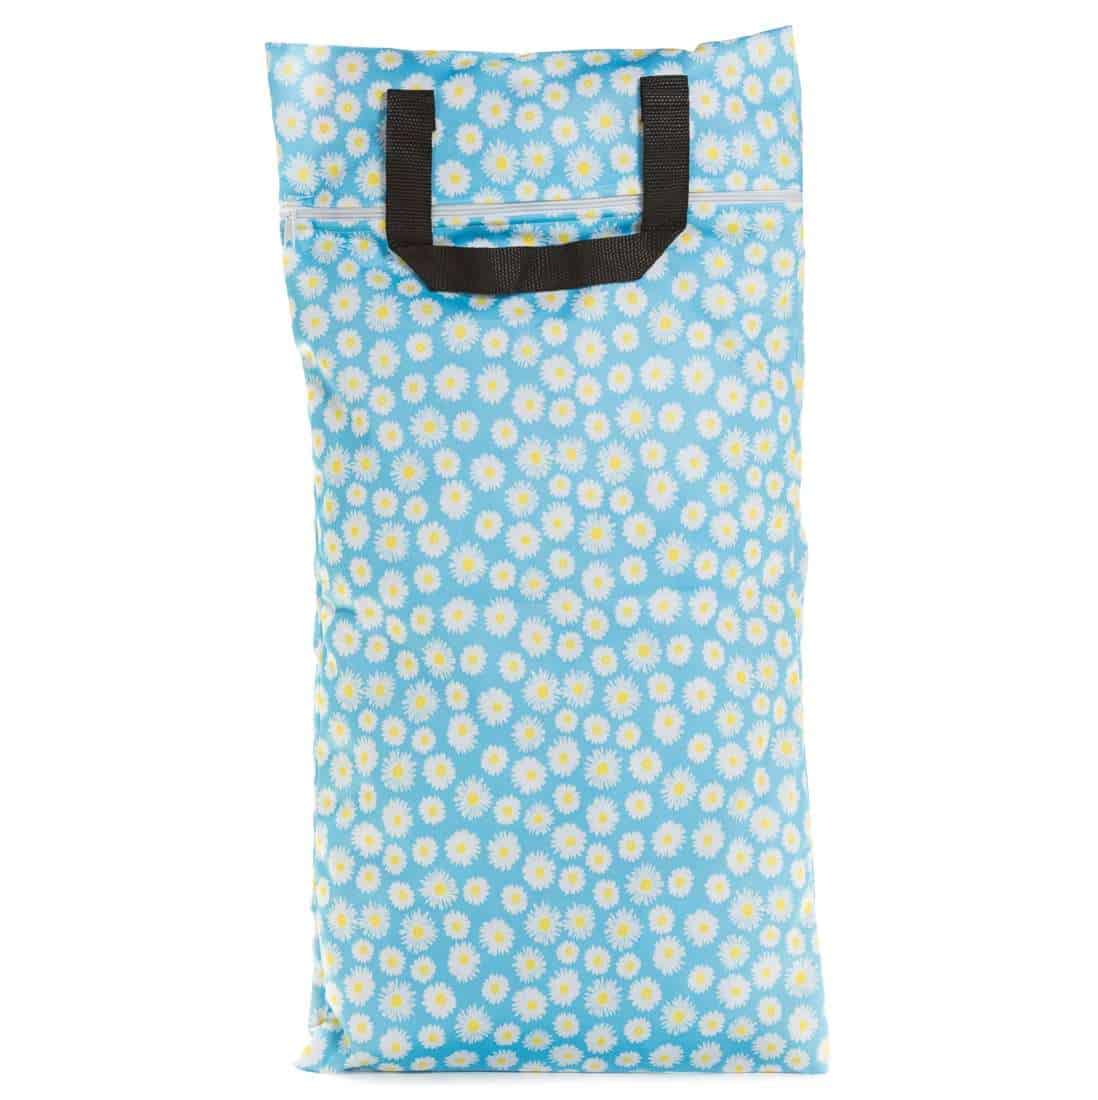 Buttons Diapers Wet Bag large - Bloom